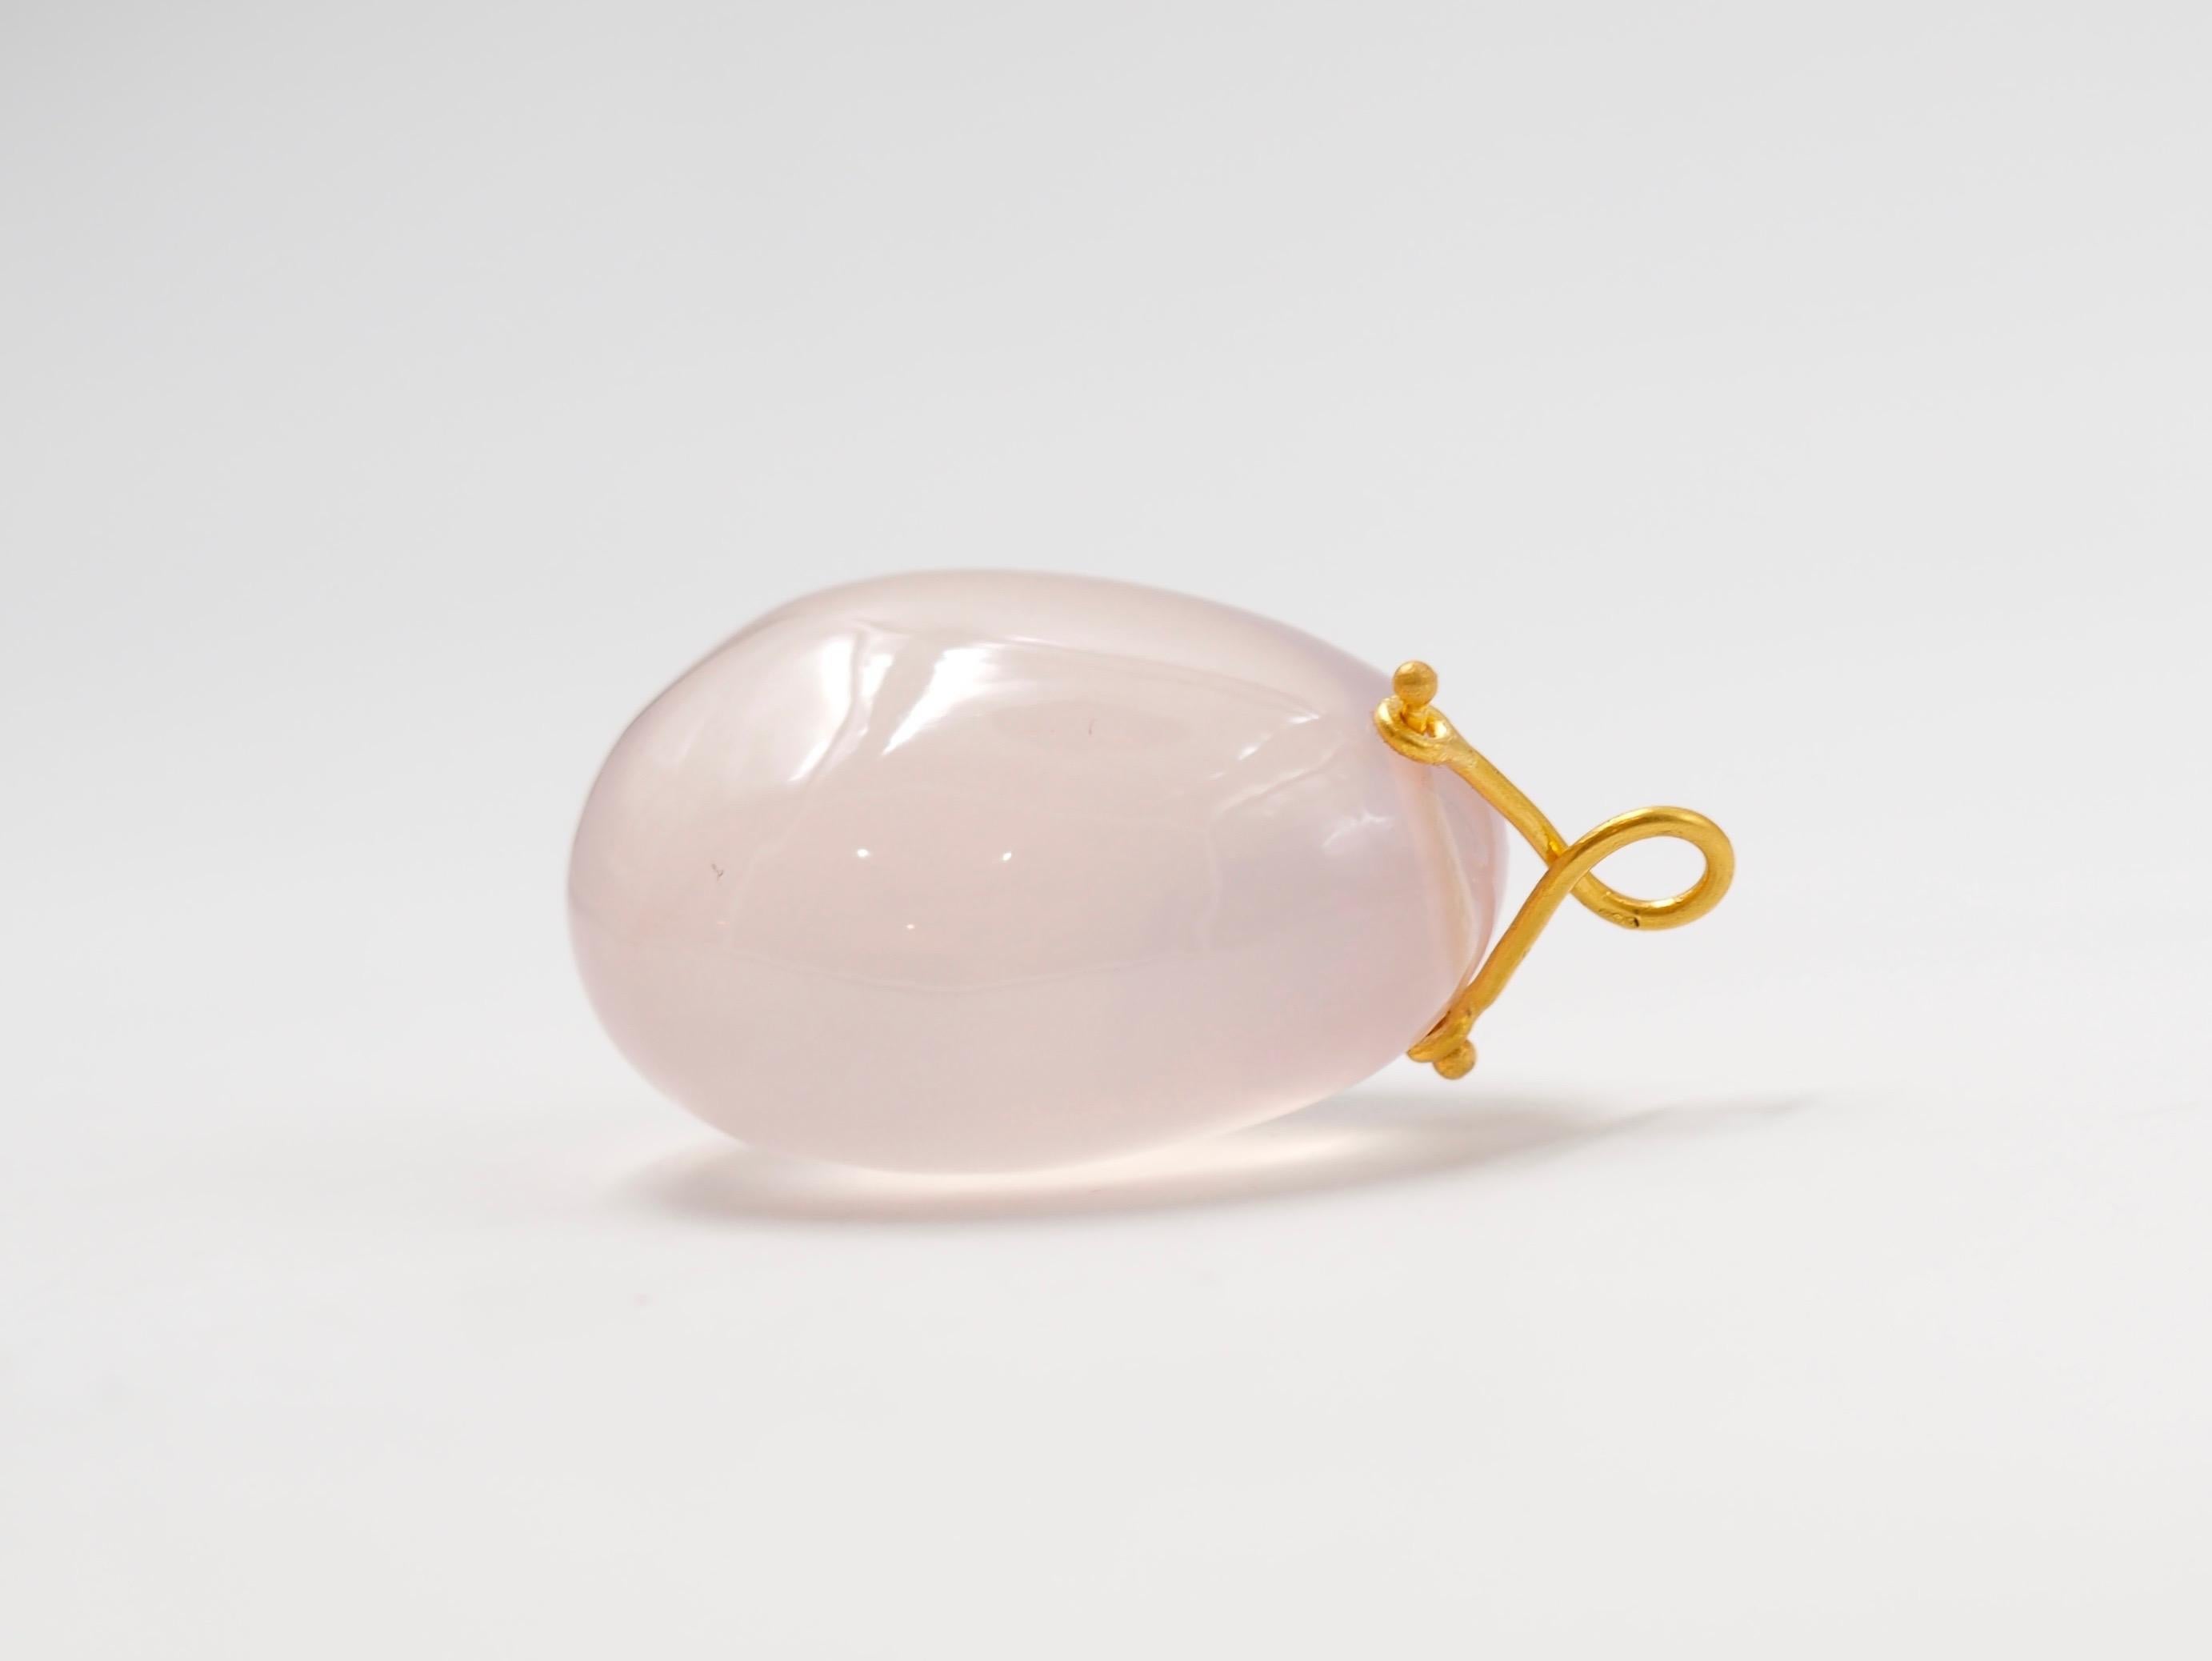 Hand-carved and handmade pendant, this stone is simply drilled to allow a 22 karat gold wire that is twisted to make a ring. 
The largest one, which is presented in the photos, has a rose quartz of approx 170 carats. 
3 stone sizes exist as you can